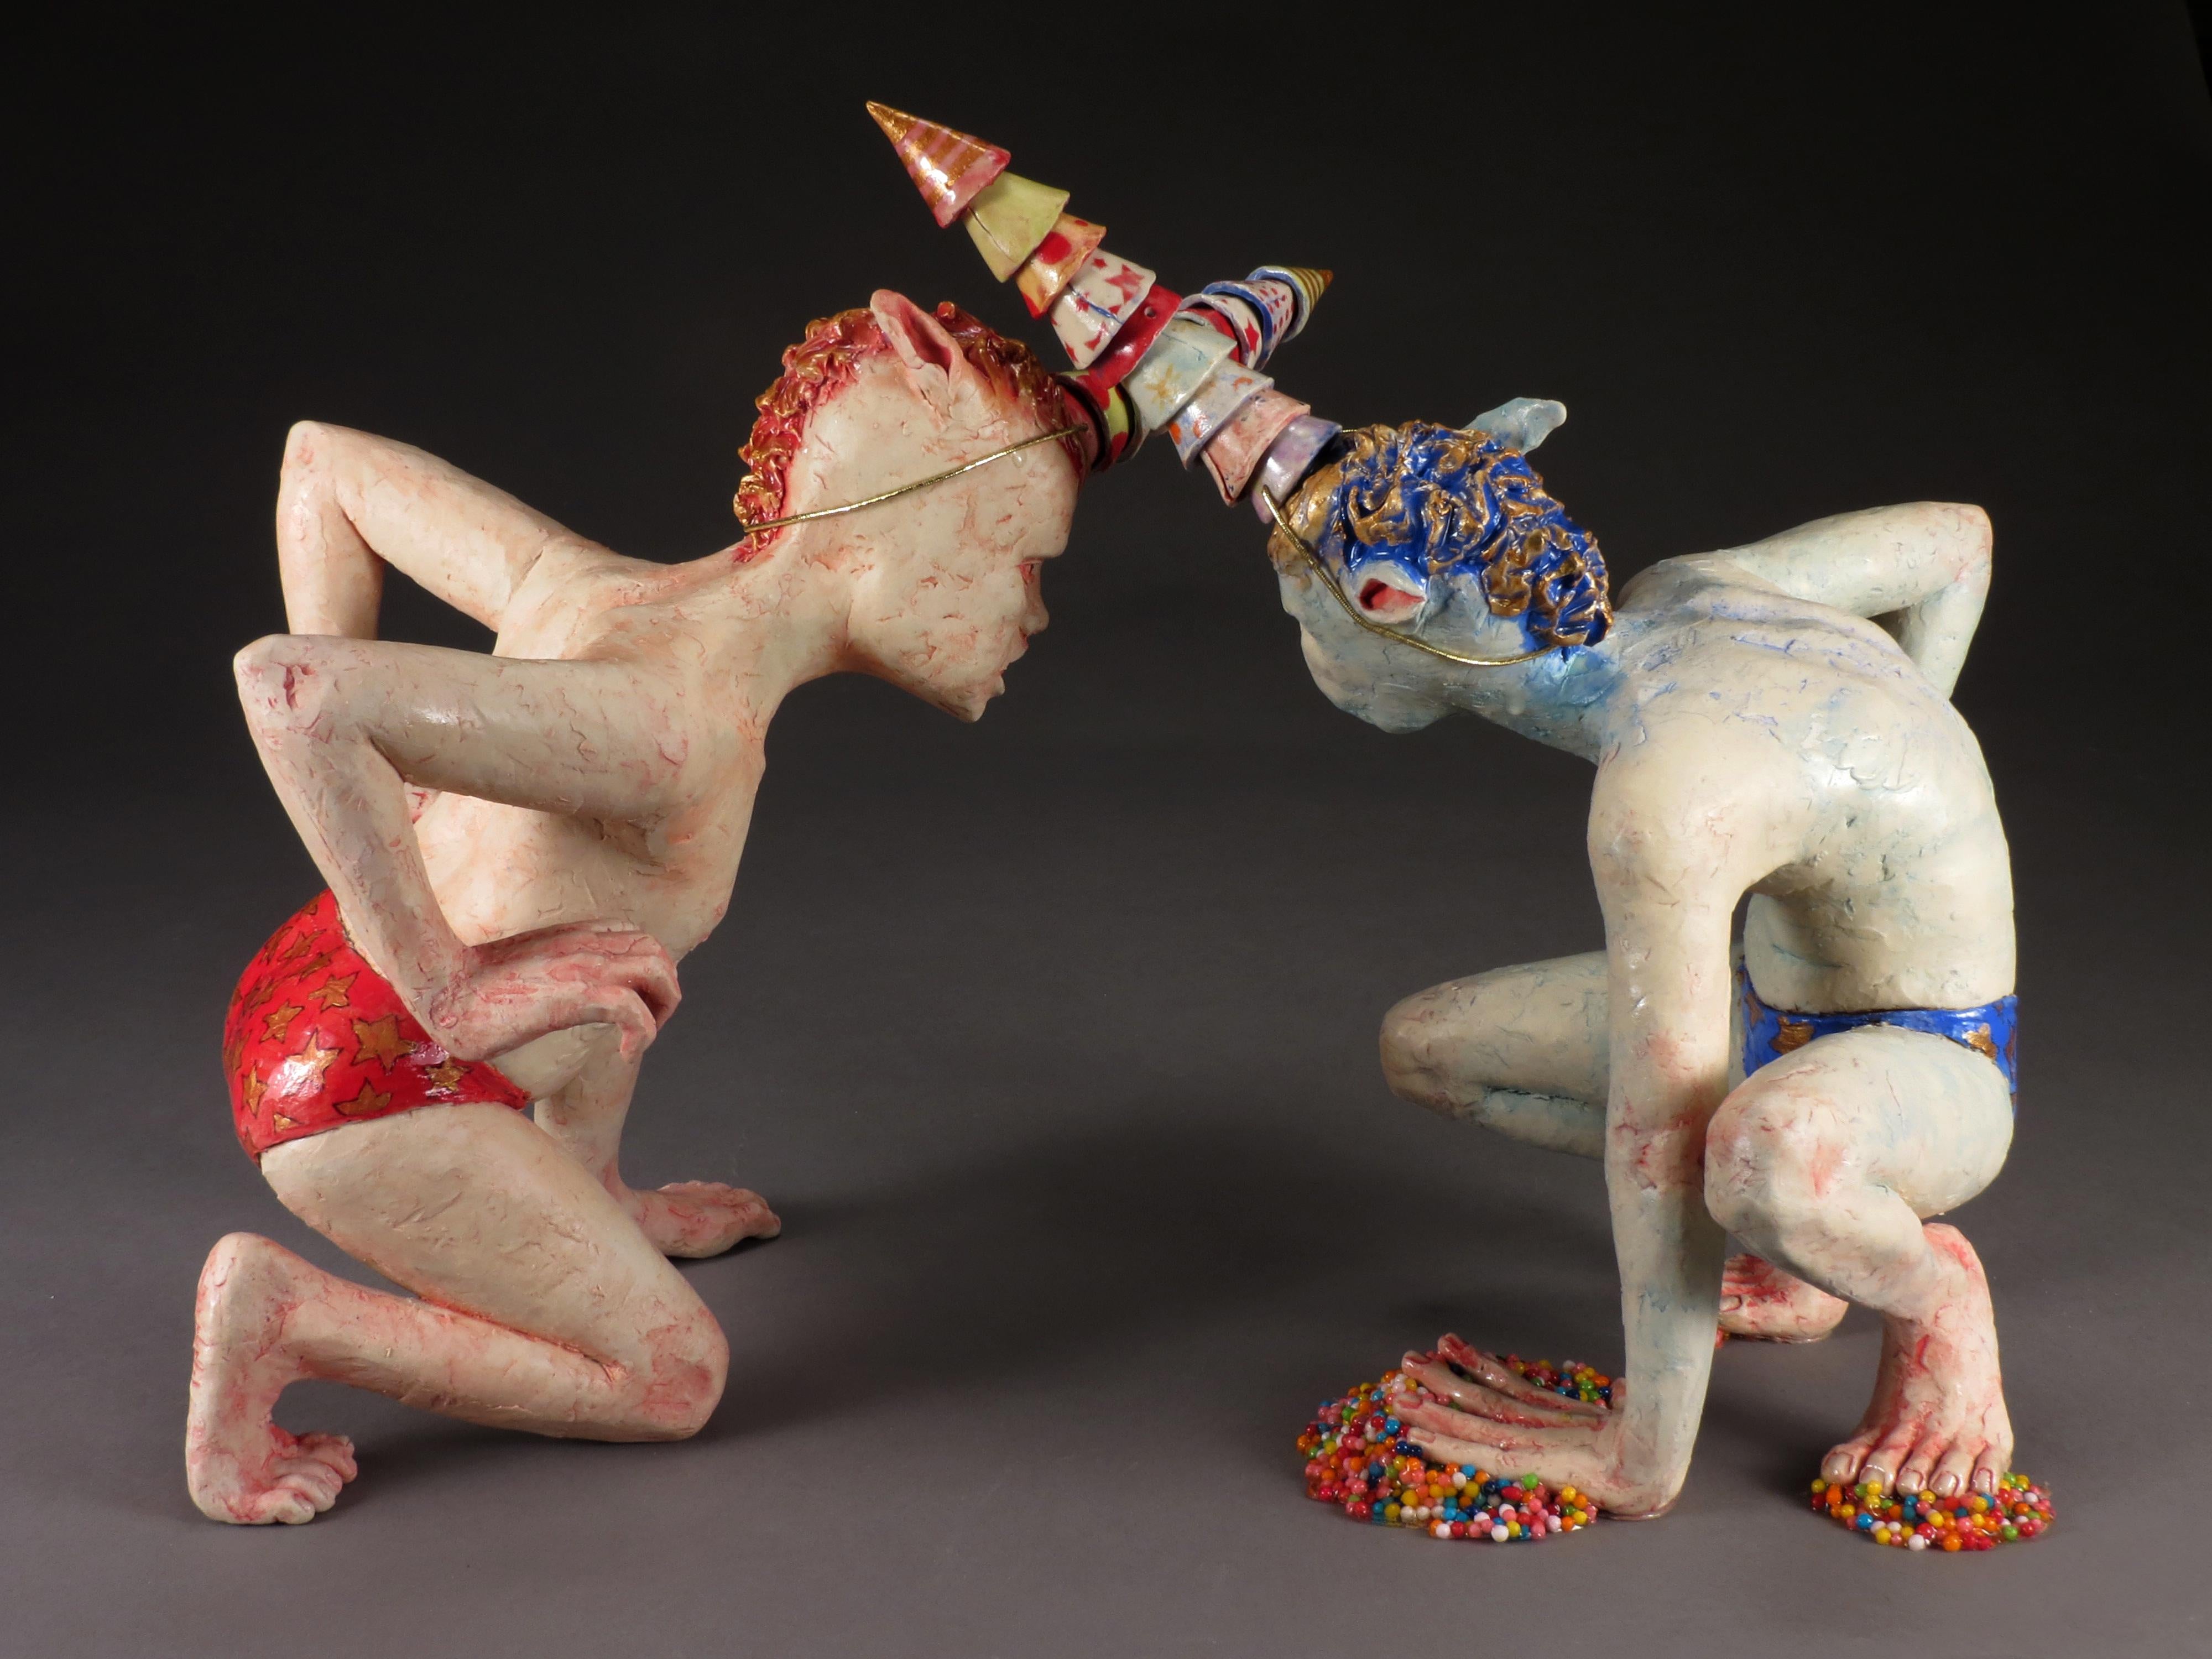 PARTY BOYS - surreal ceramic sculpture - monsters - Sculpture by Magda Gluszek